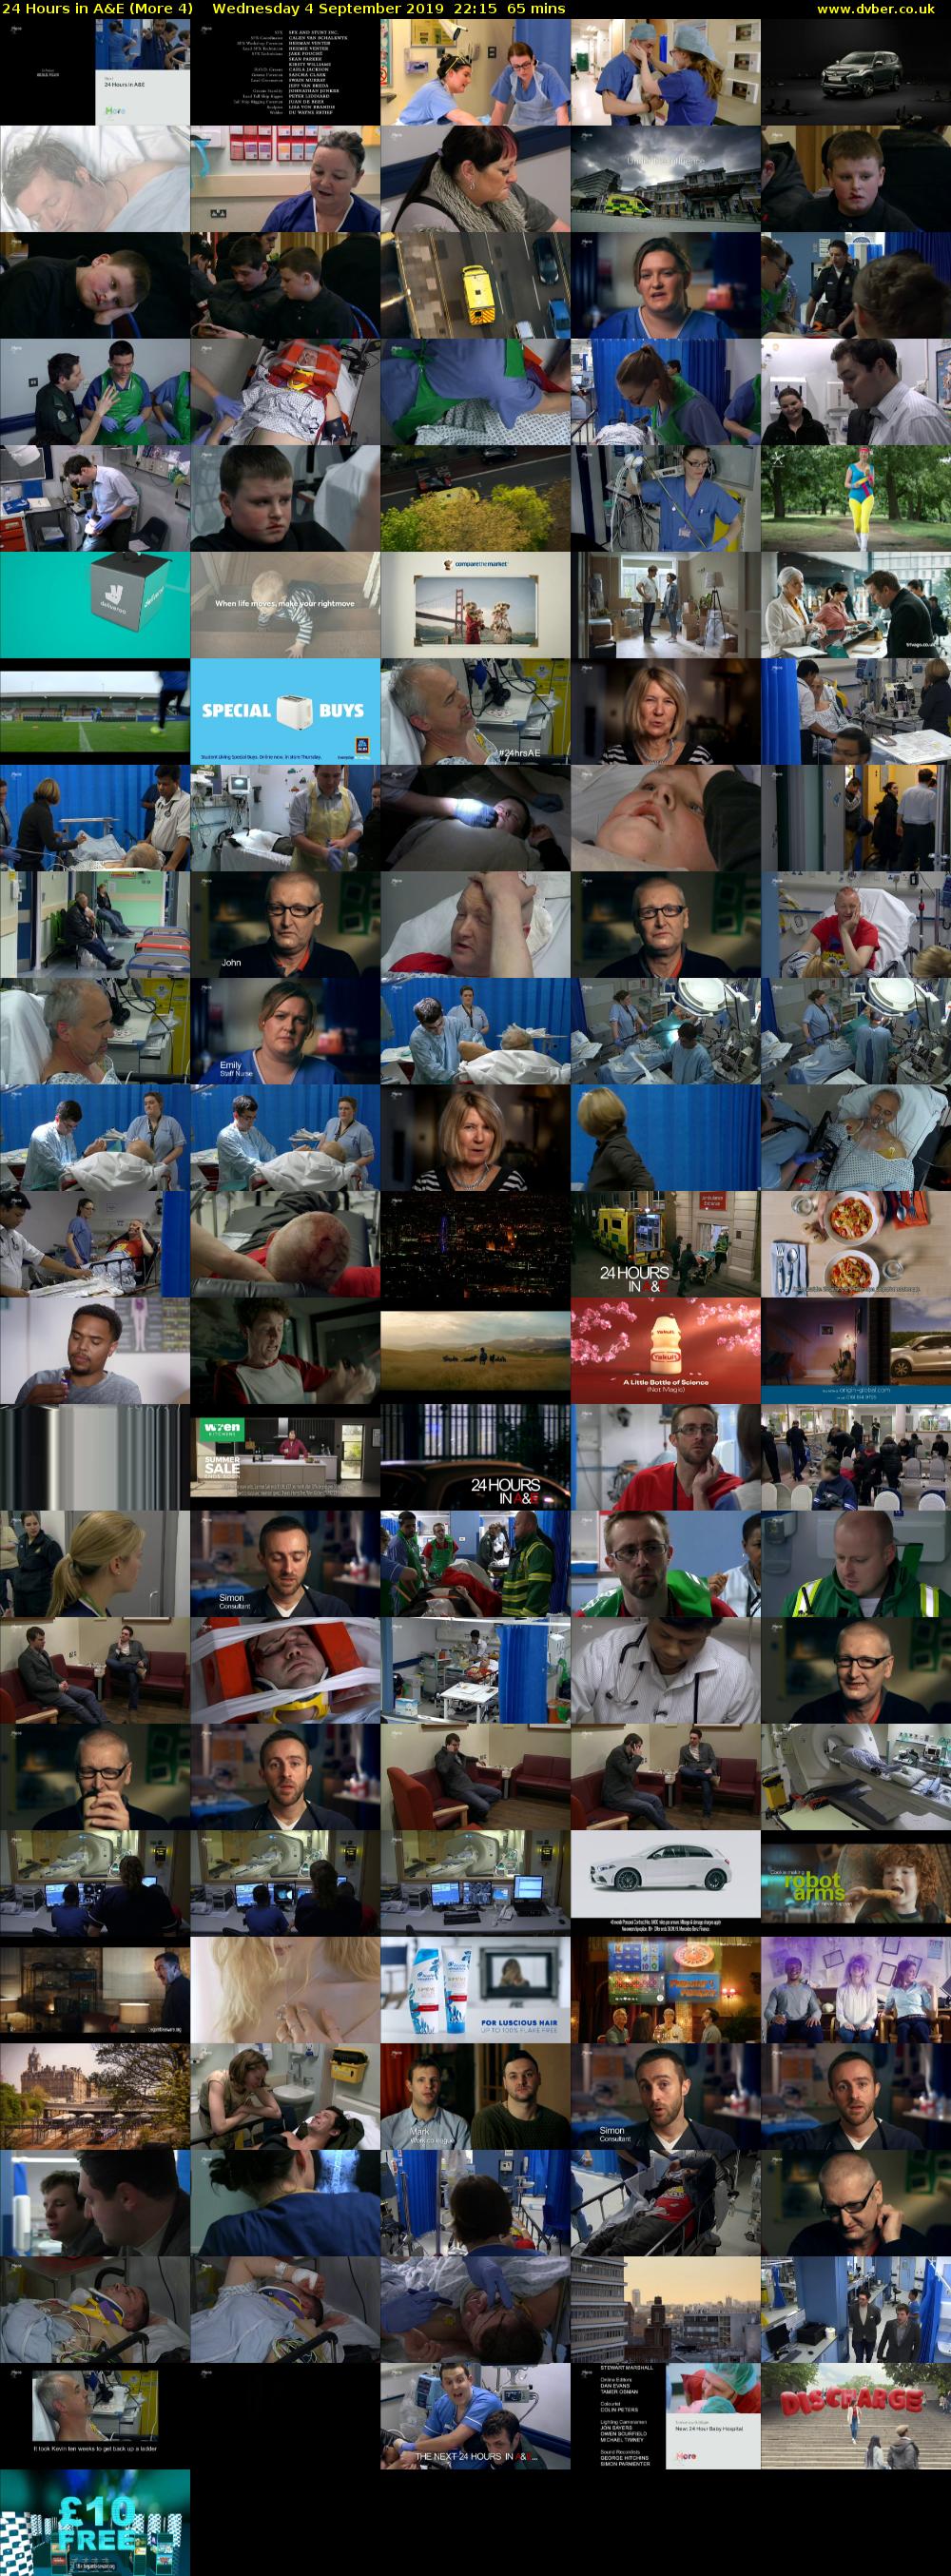 24 Hours in A&E (More 4) Wednesday 4 September 2019 22:15 - 23:20